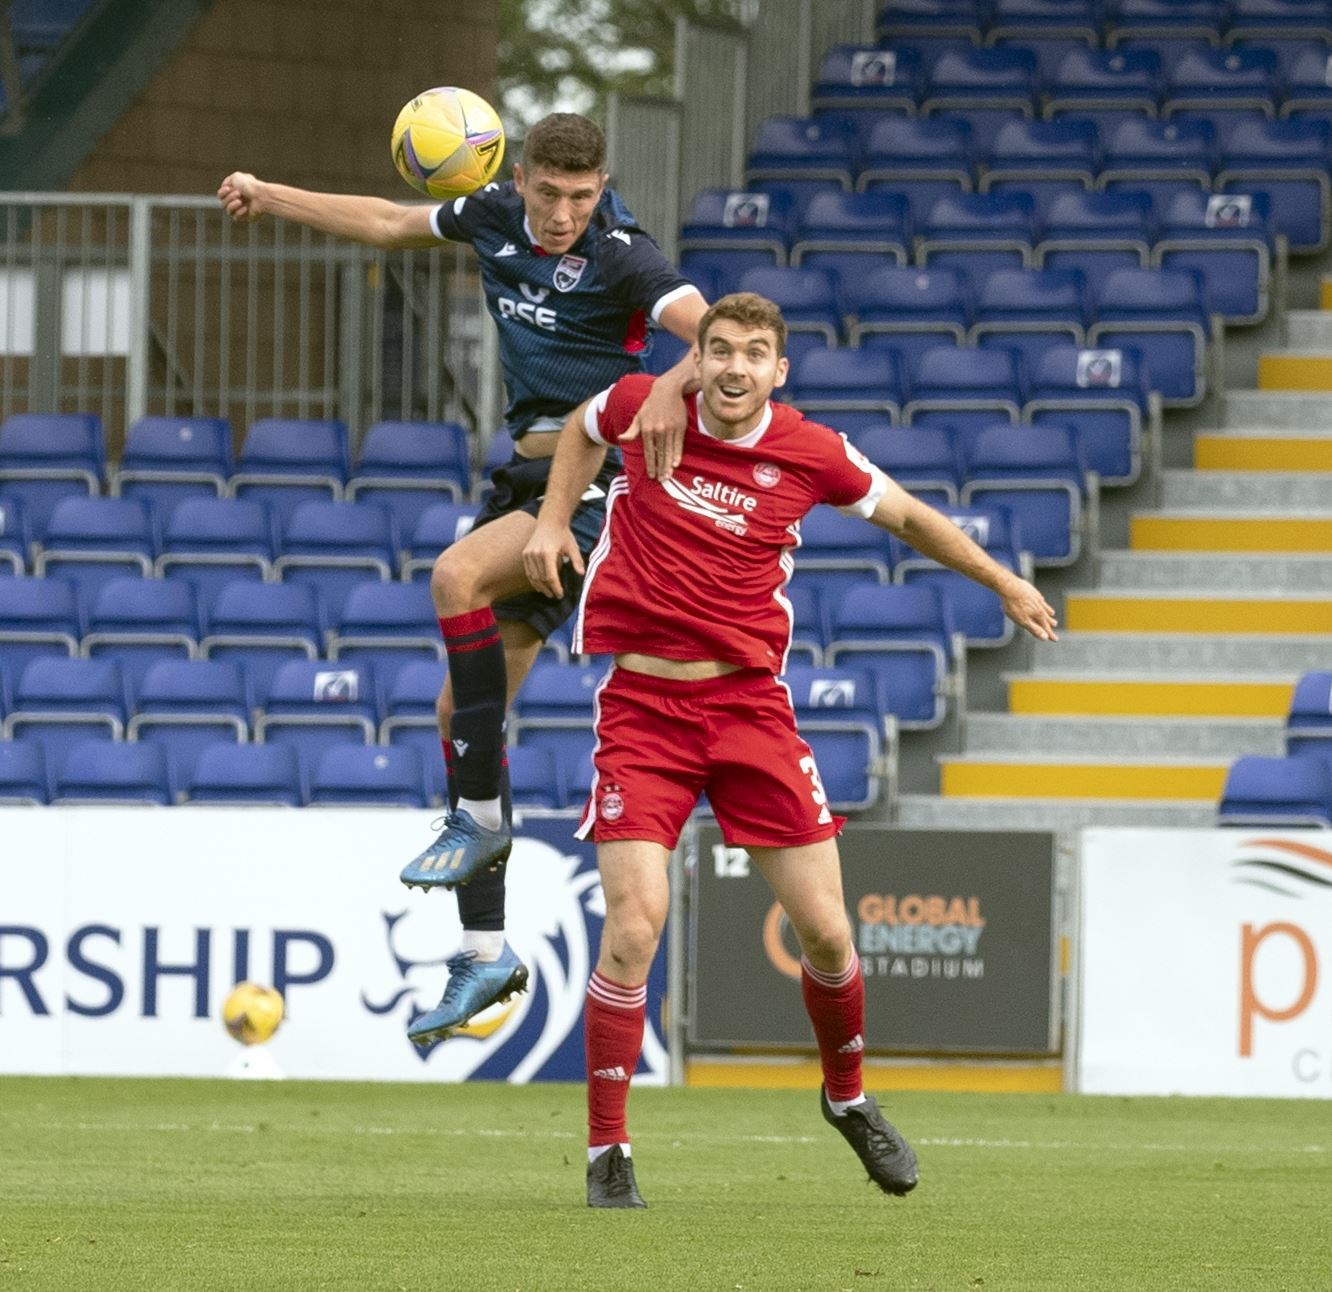 Picture - Ken Macpherson, Inverness. Ross County(0) v Aberdeen(3). 27.09.20. Ross County's Ross Stewart climbs above Aberdeen's Tommy Hoban to head for goal.